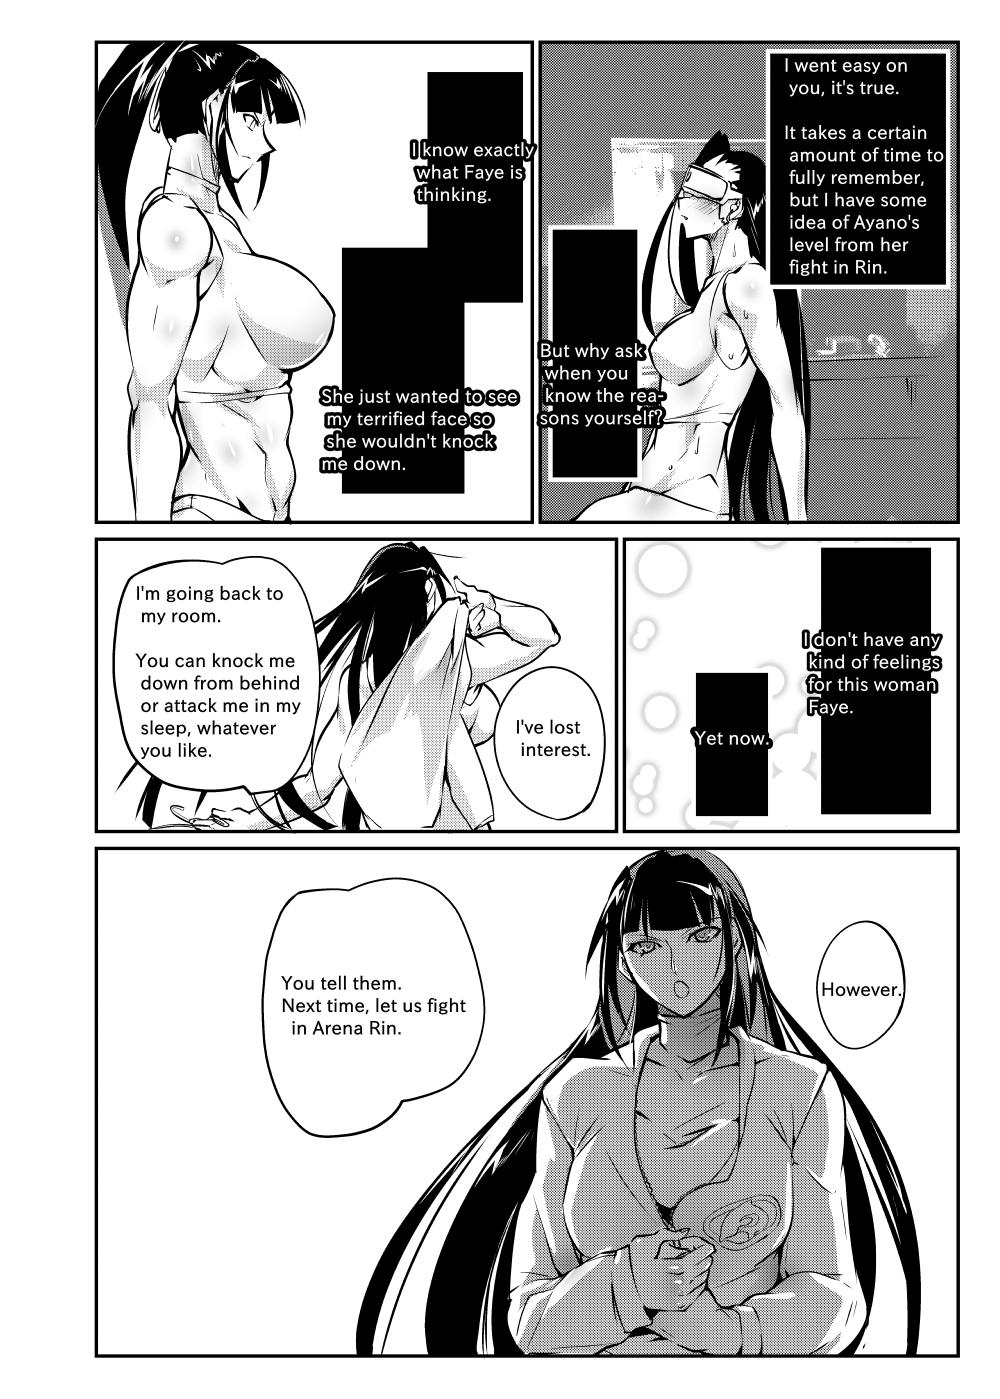 Old Vs Young Tougijou Rin - Arena Rin 5 - Original Dirty Talk - Page 31